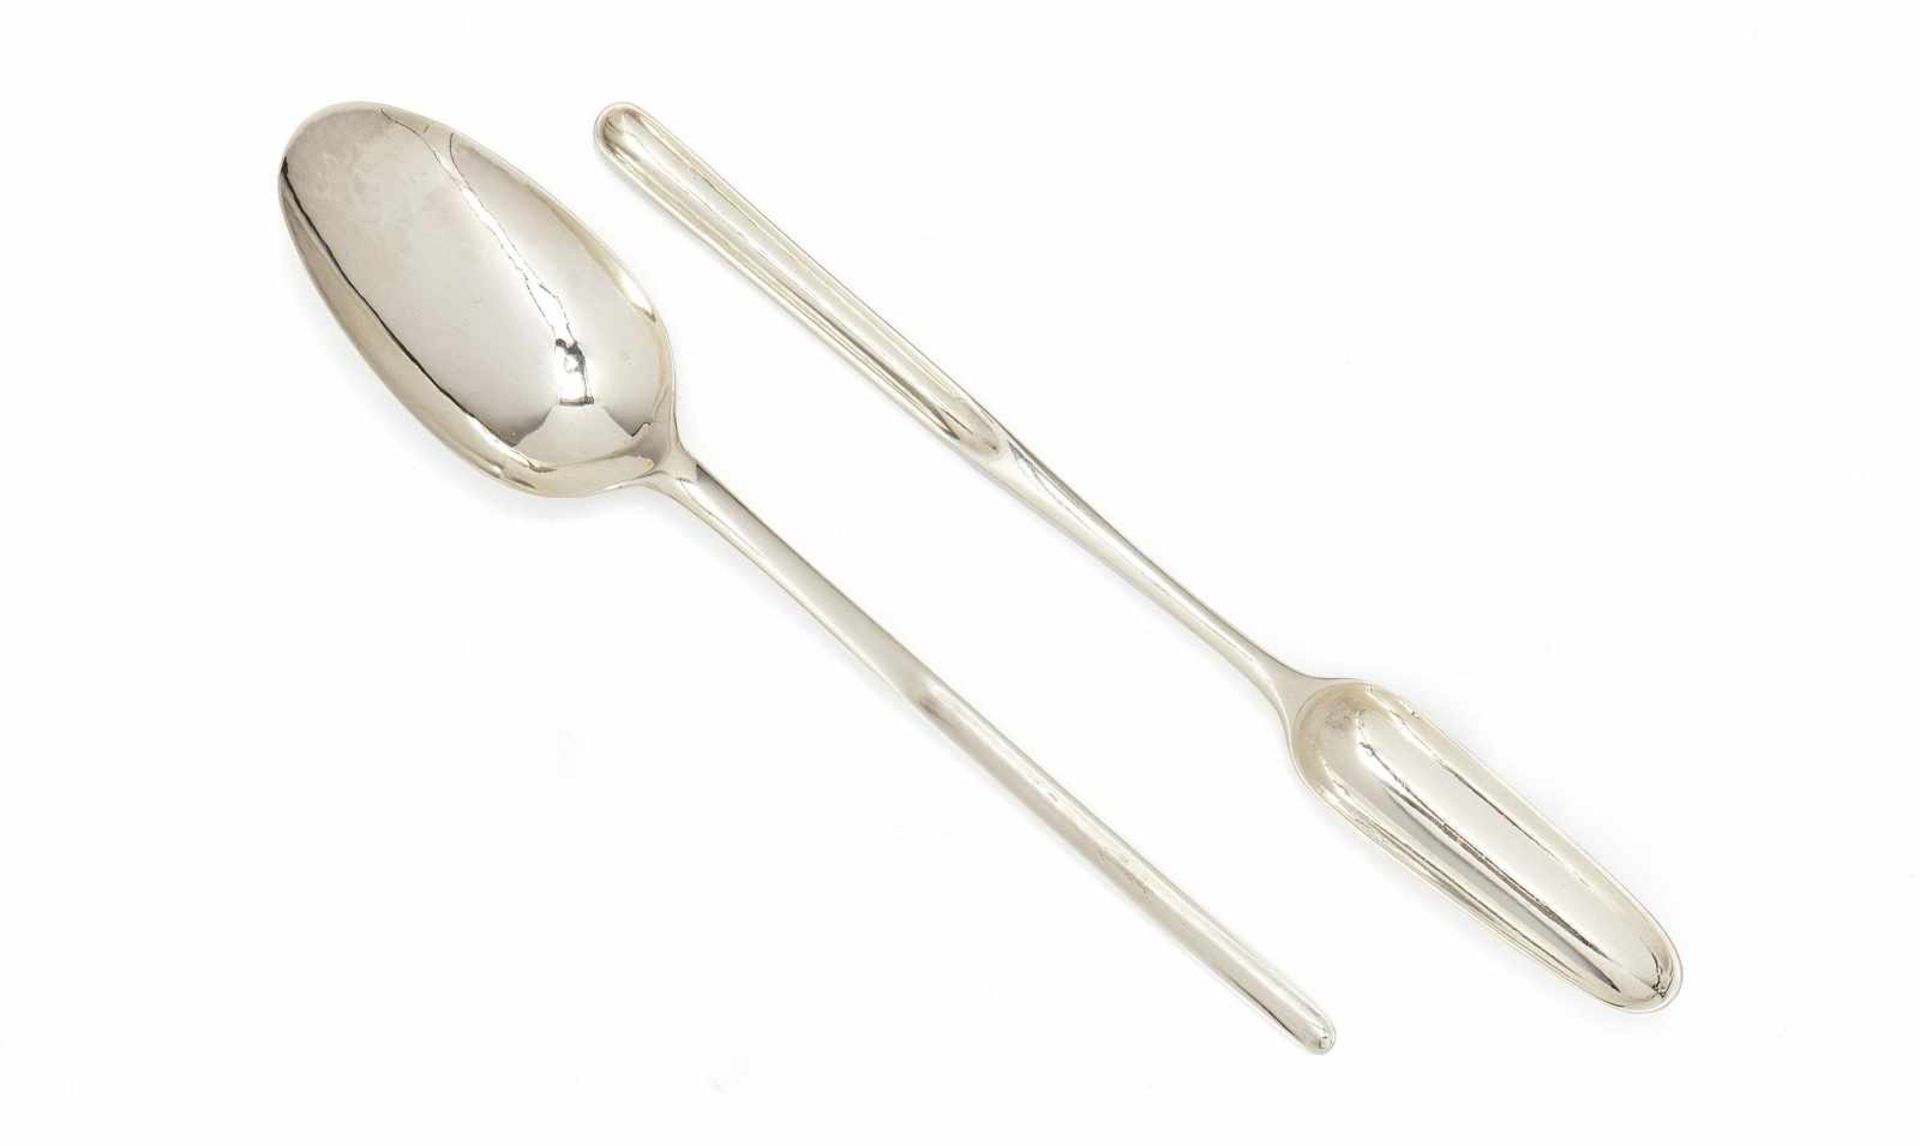 SILVER GEORGE III AND GEORGE I MARROW SPOONS. - Image 2 of 2